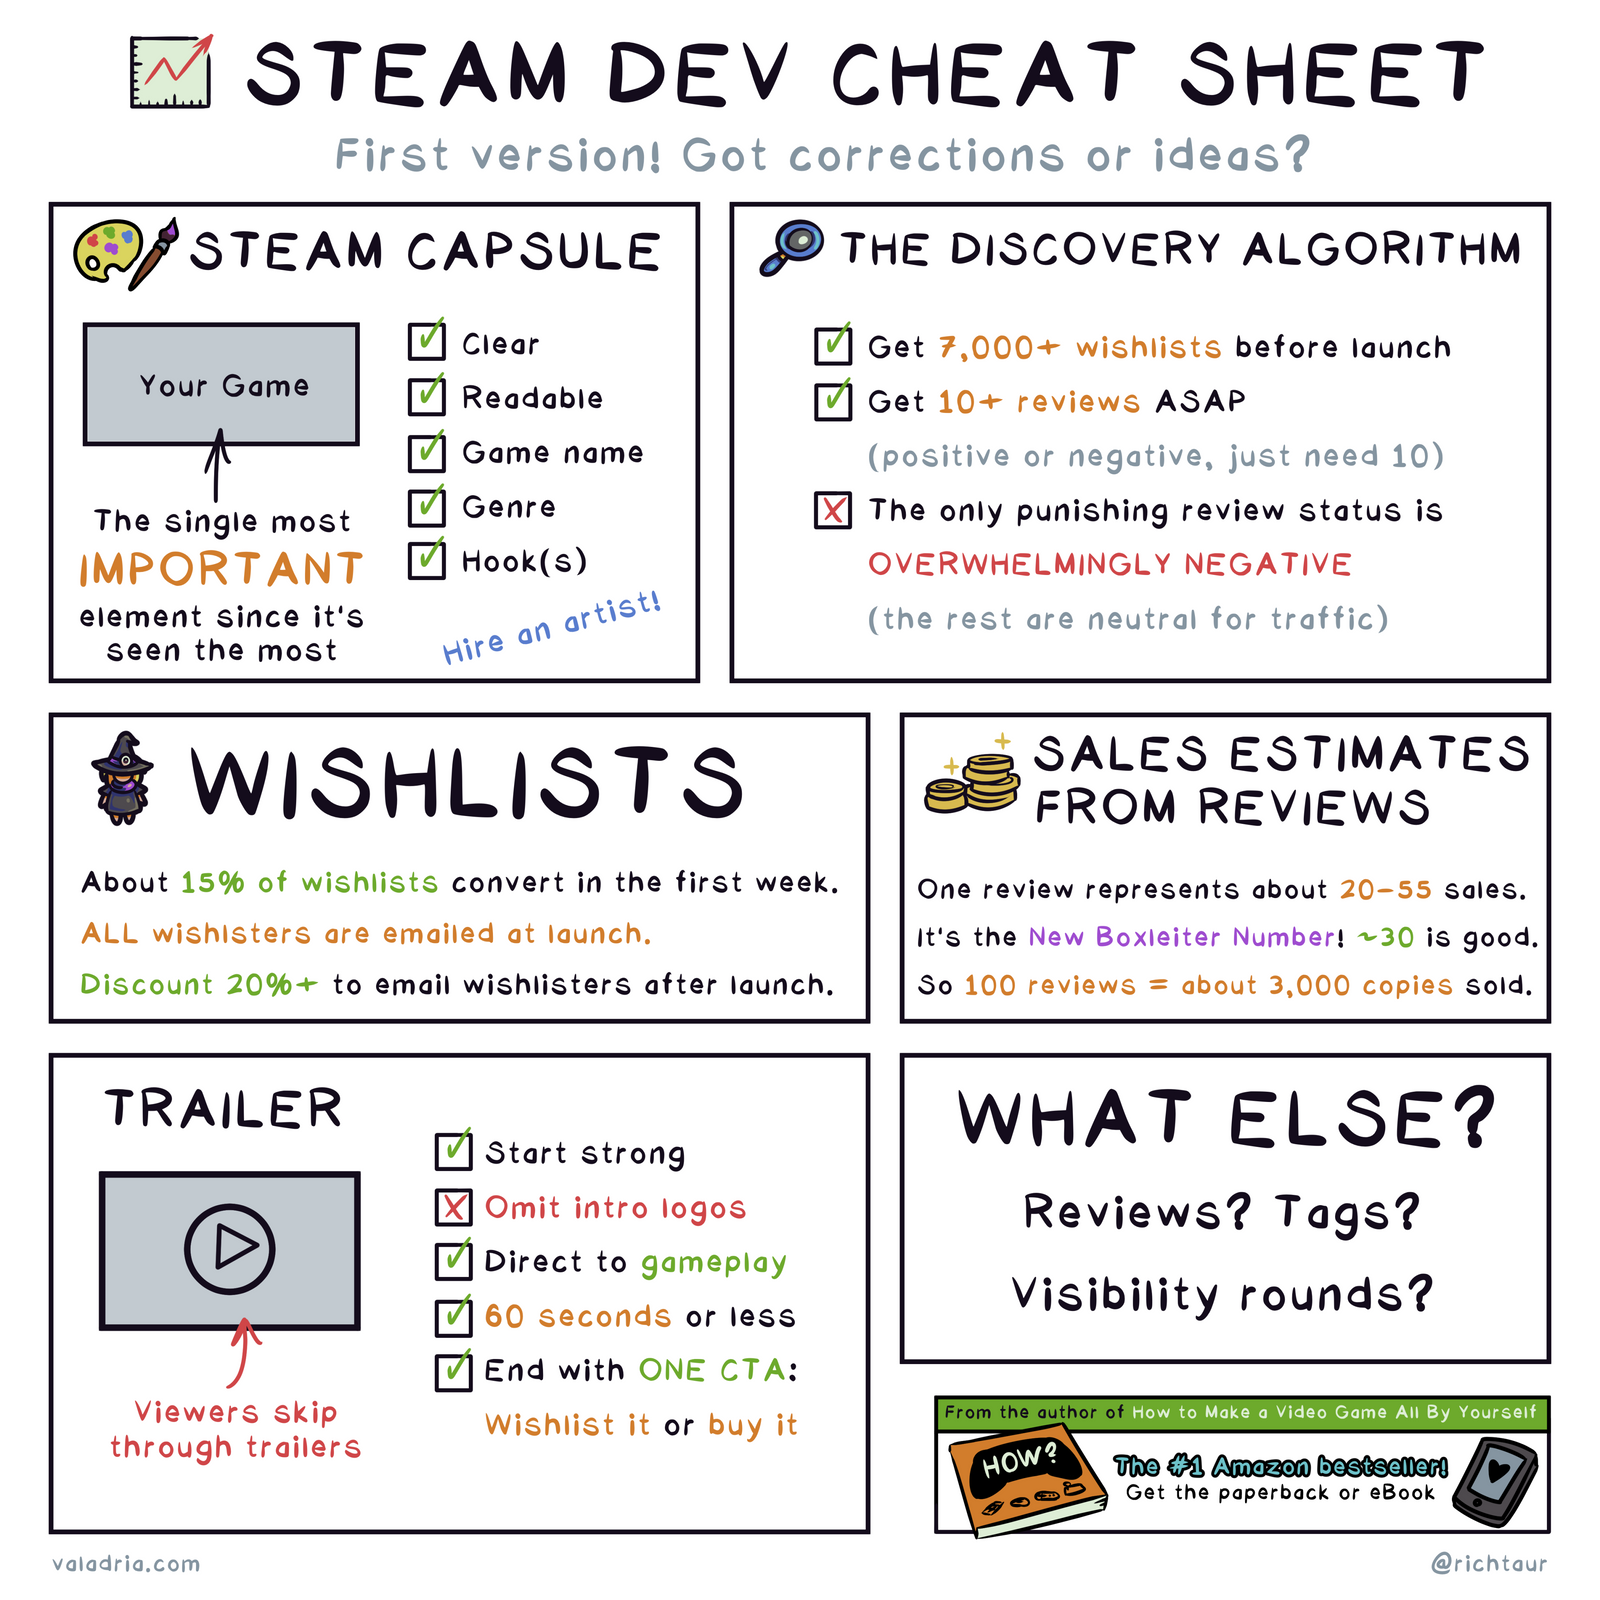 STEAM DEV CHEAT SHEET First version! Got corrections or ideas?  STEAM CAPSULE (Your Game) The single most IMPORTANT element since it's seen the most Clear Readable Game name Genre Hook(s) Hire on artist!  THE DISCOVERY ALGORITHM Get 7,000+ wishlists before launch Get 10+ reviews ASAP (positive or negative, just need 10) The only punishing review status is OVERWHELMINGLY NEGATIVE (the rest are neutral for traffic)  WISHLISTS About 15% of wishlists convert in the first week. ALL wishlisters are emailed at launch. Discount 20%+ to email wishlisters after launch.  SALES ESTIMATES FROM REVIEWS One review represents about 20-55 soles. It's the New Boxleiter Number! ~30 is good So 100 reviews = about 3,000 copies sold.  TRAILER (Viewers skip through trailers) Start strong Omit intro logos Direct to gameplay 60 seconds or less End with ONE CTA: Wishlist it or buy it  WHAT ELSE? Reviews? Tags? Visibility rounds?  From the author of How to Make a Video Game All By Yourself valadria.com 